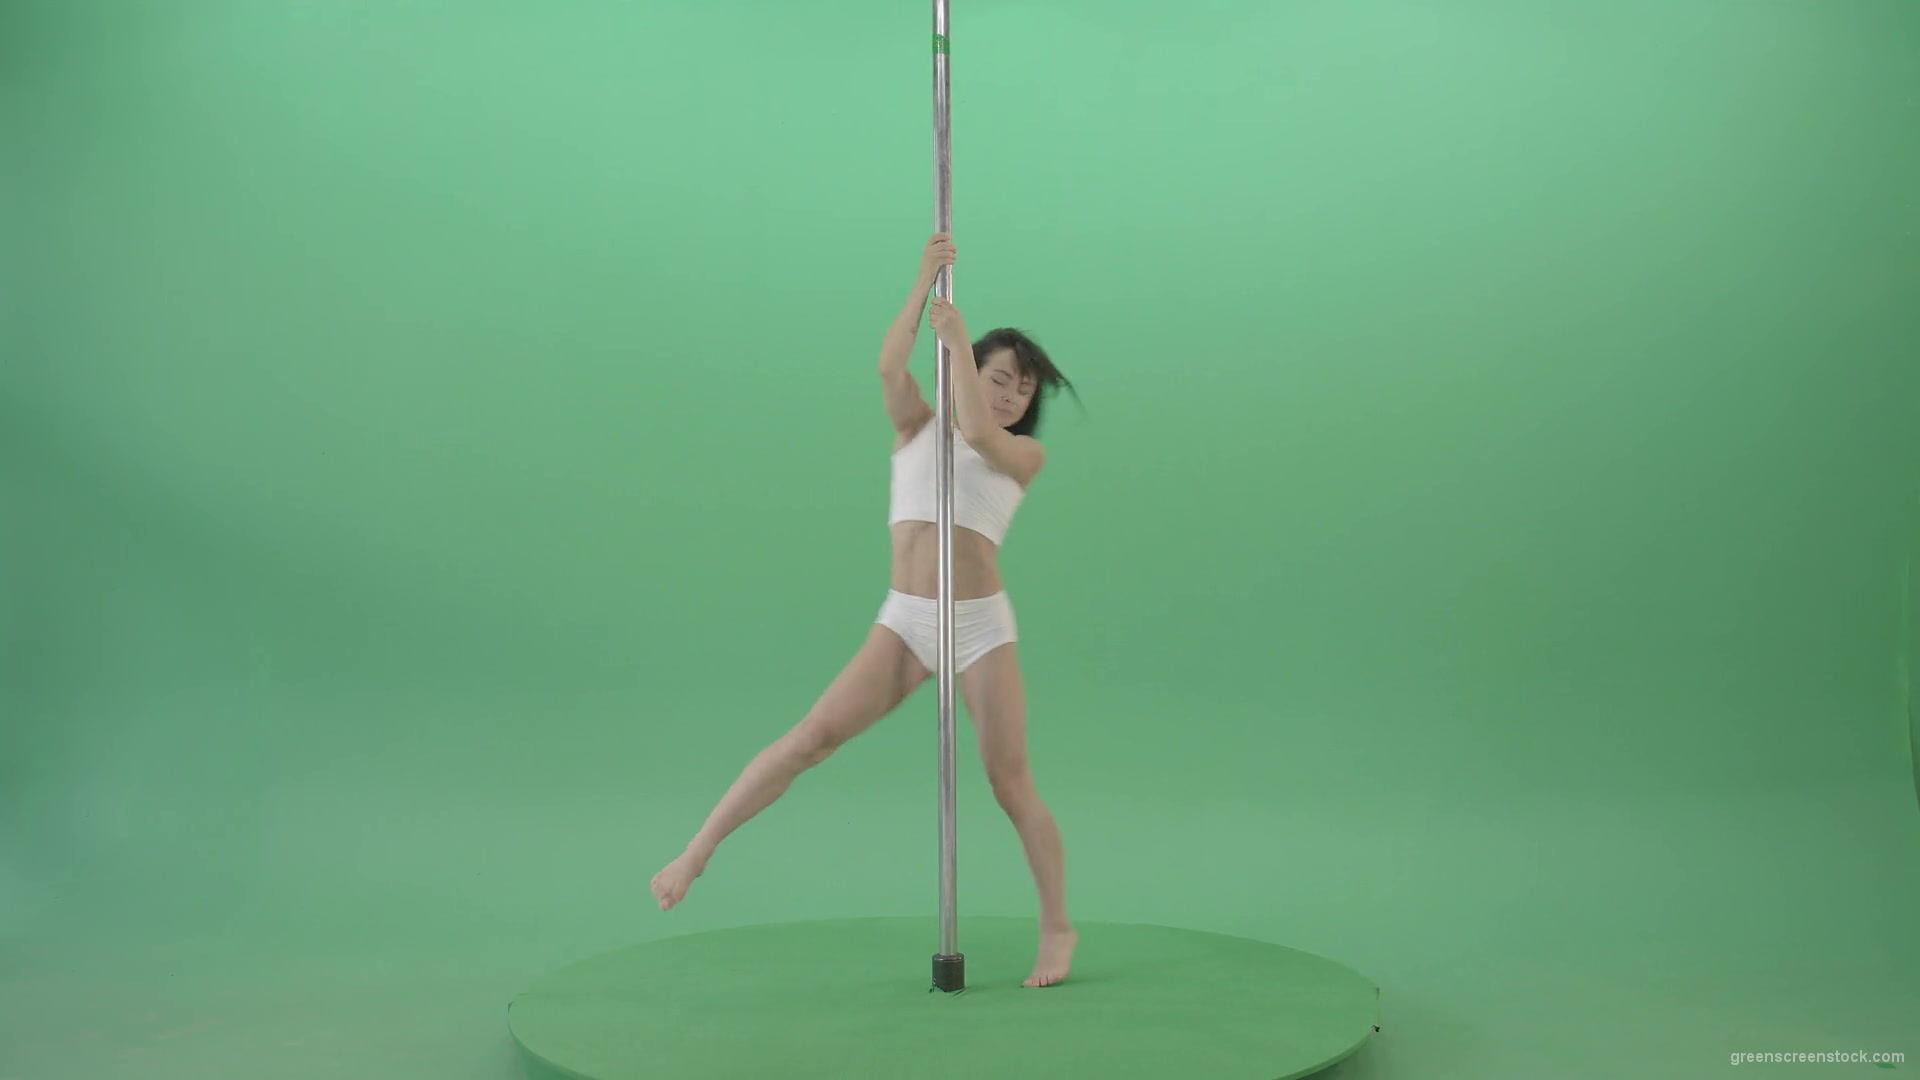 Green-Screen-Woman-spinning-gracefully-on-pole-dance-Video-Footage-1920_008 Green Screen Stock